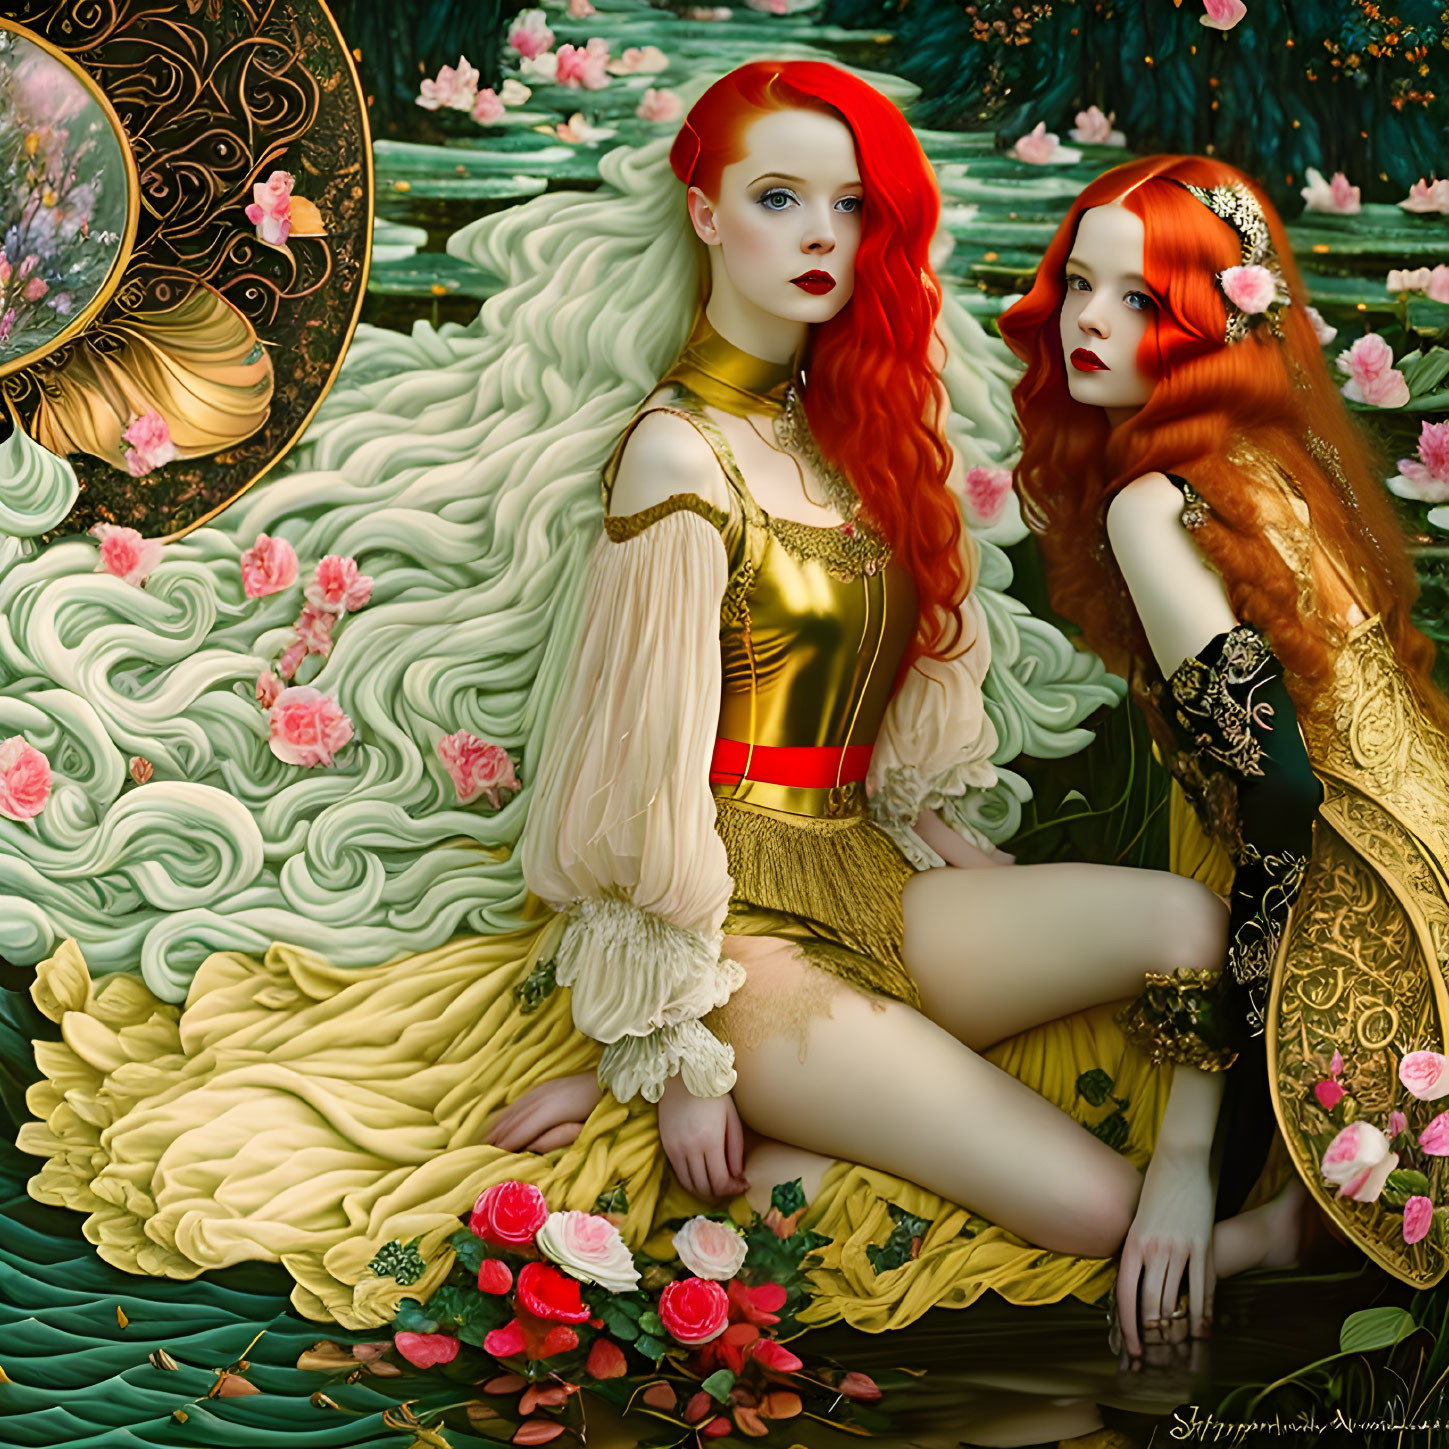 Two red-haired women in fantasy costumes among roses and intricate backdrop.